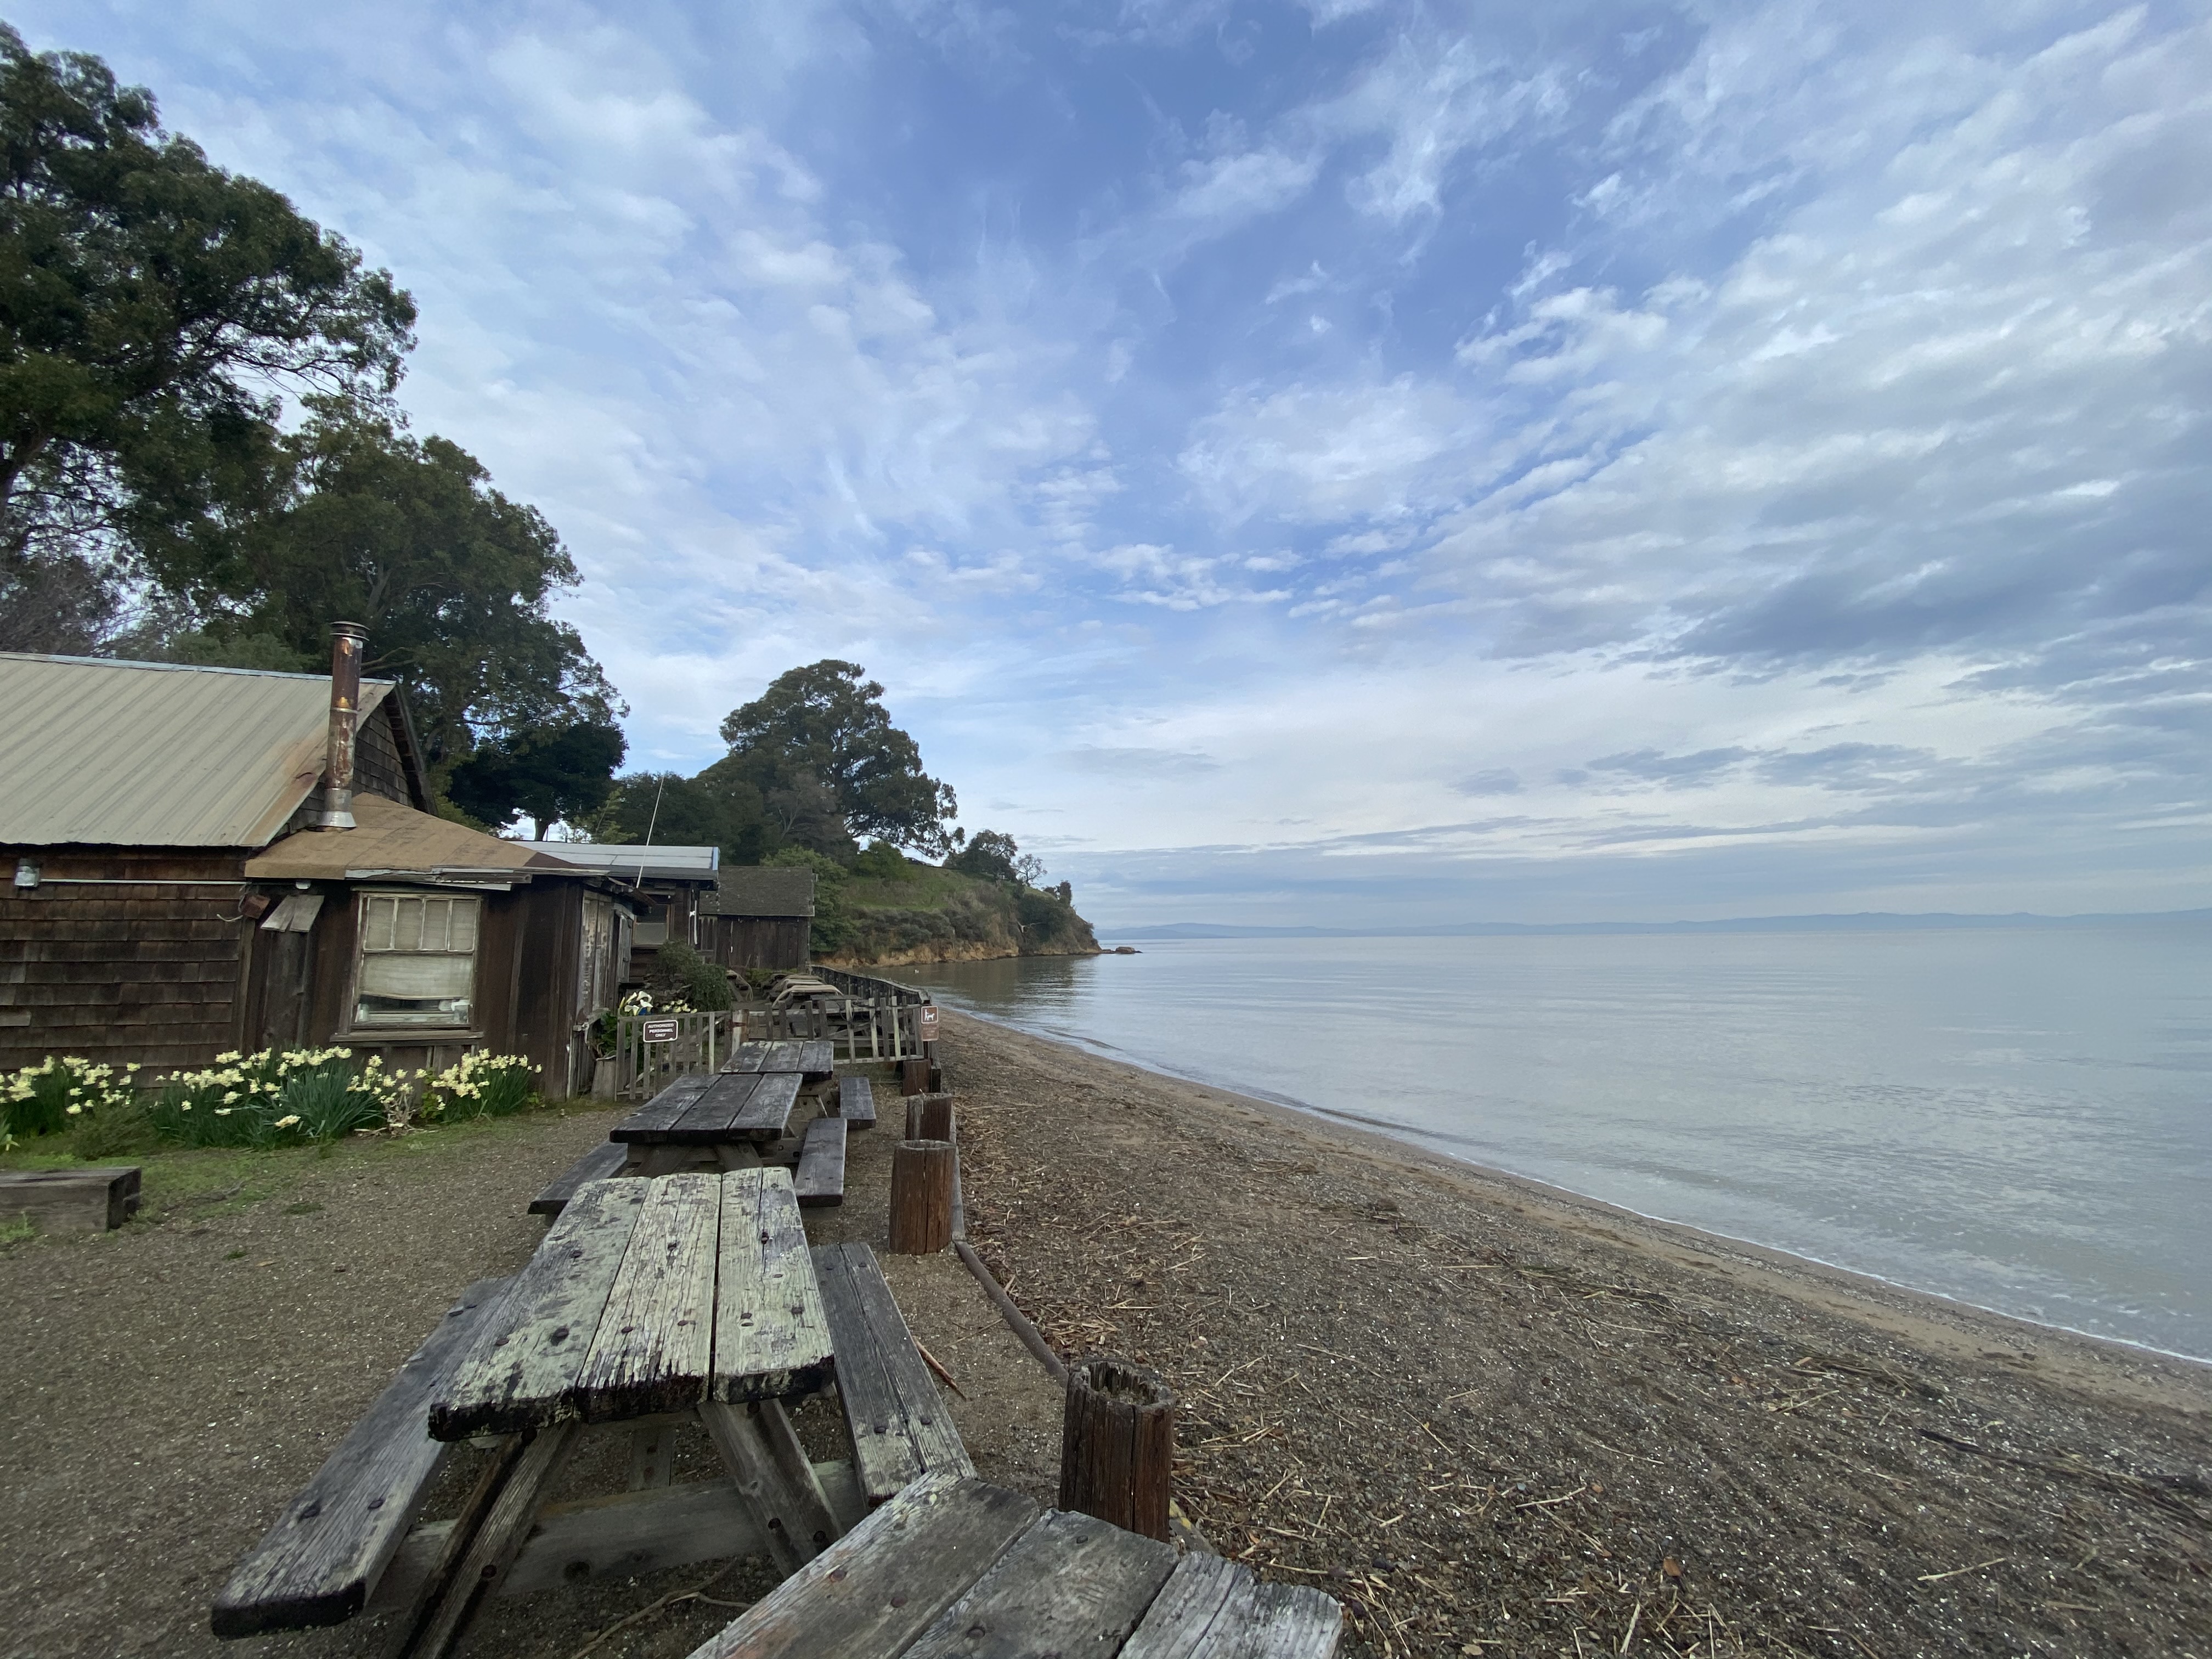 A cabin sits feet from the beach, with picnic tables in the foreground.